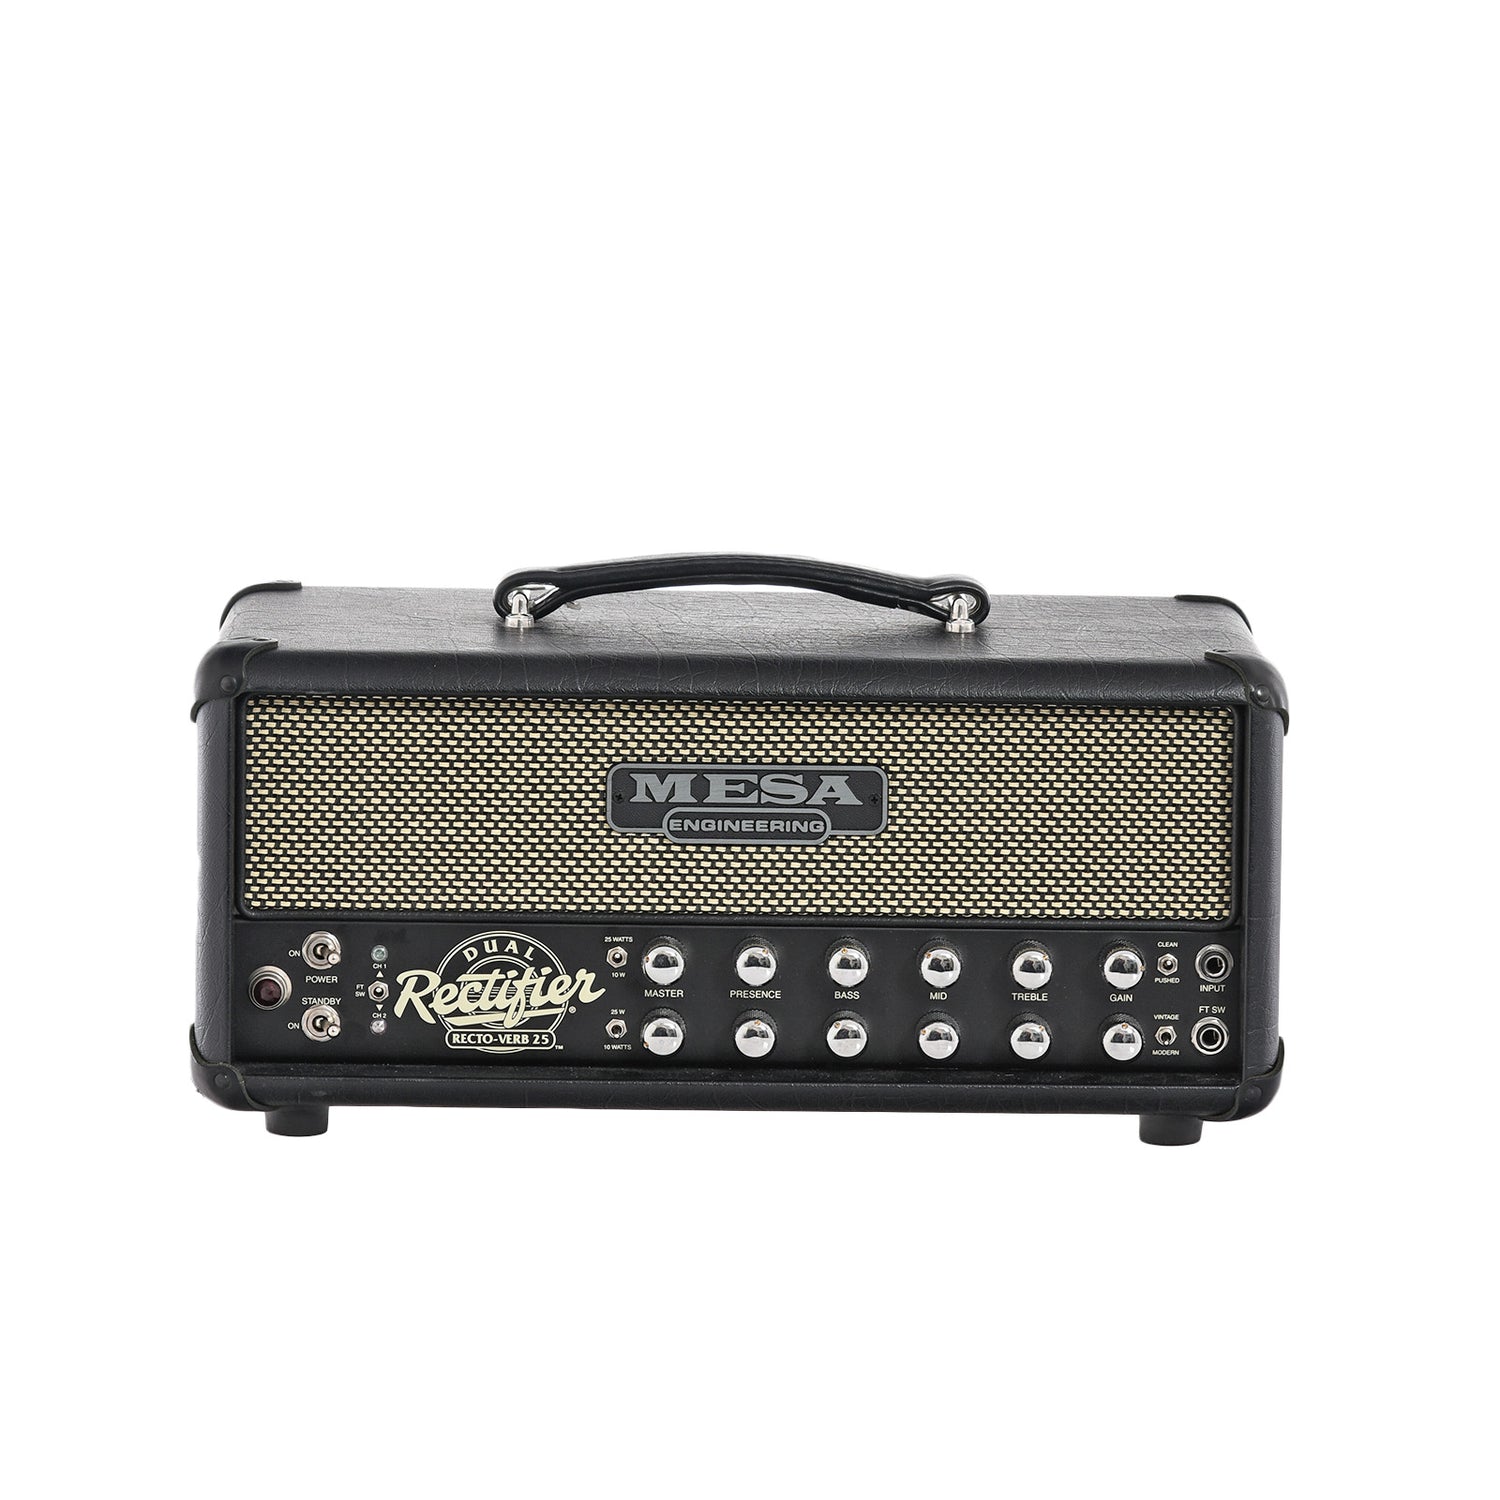 Image 1 of Mesa Boogie Rectoverb 25- SKU# 130U-210974 : Product Type Amps & Amp Accessories : Elderly Instruments